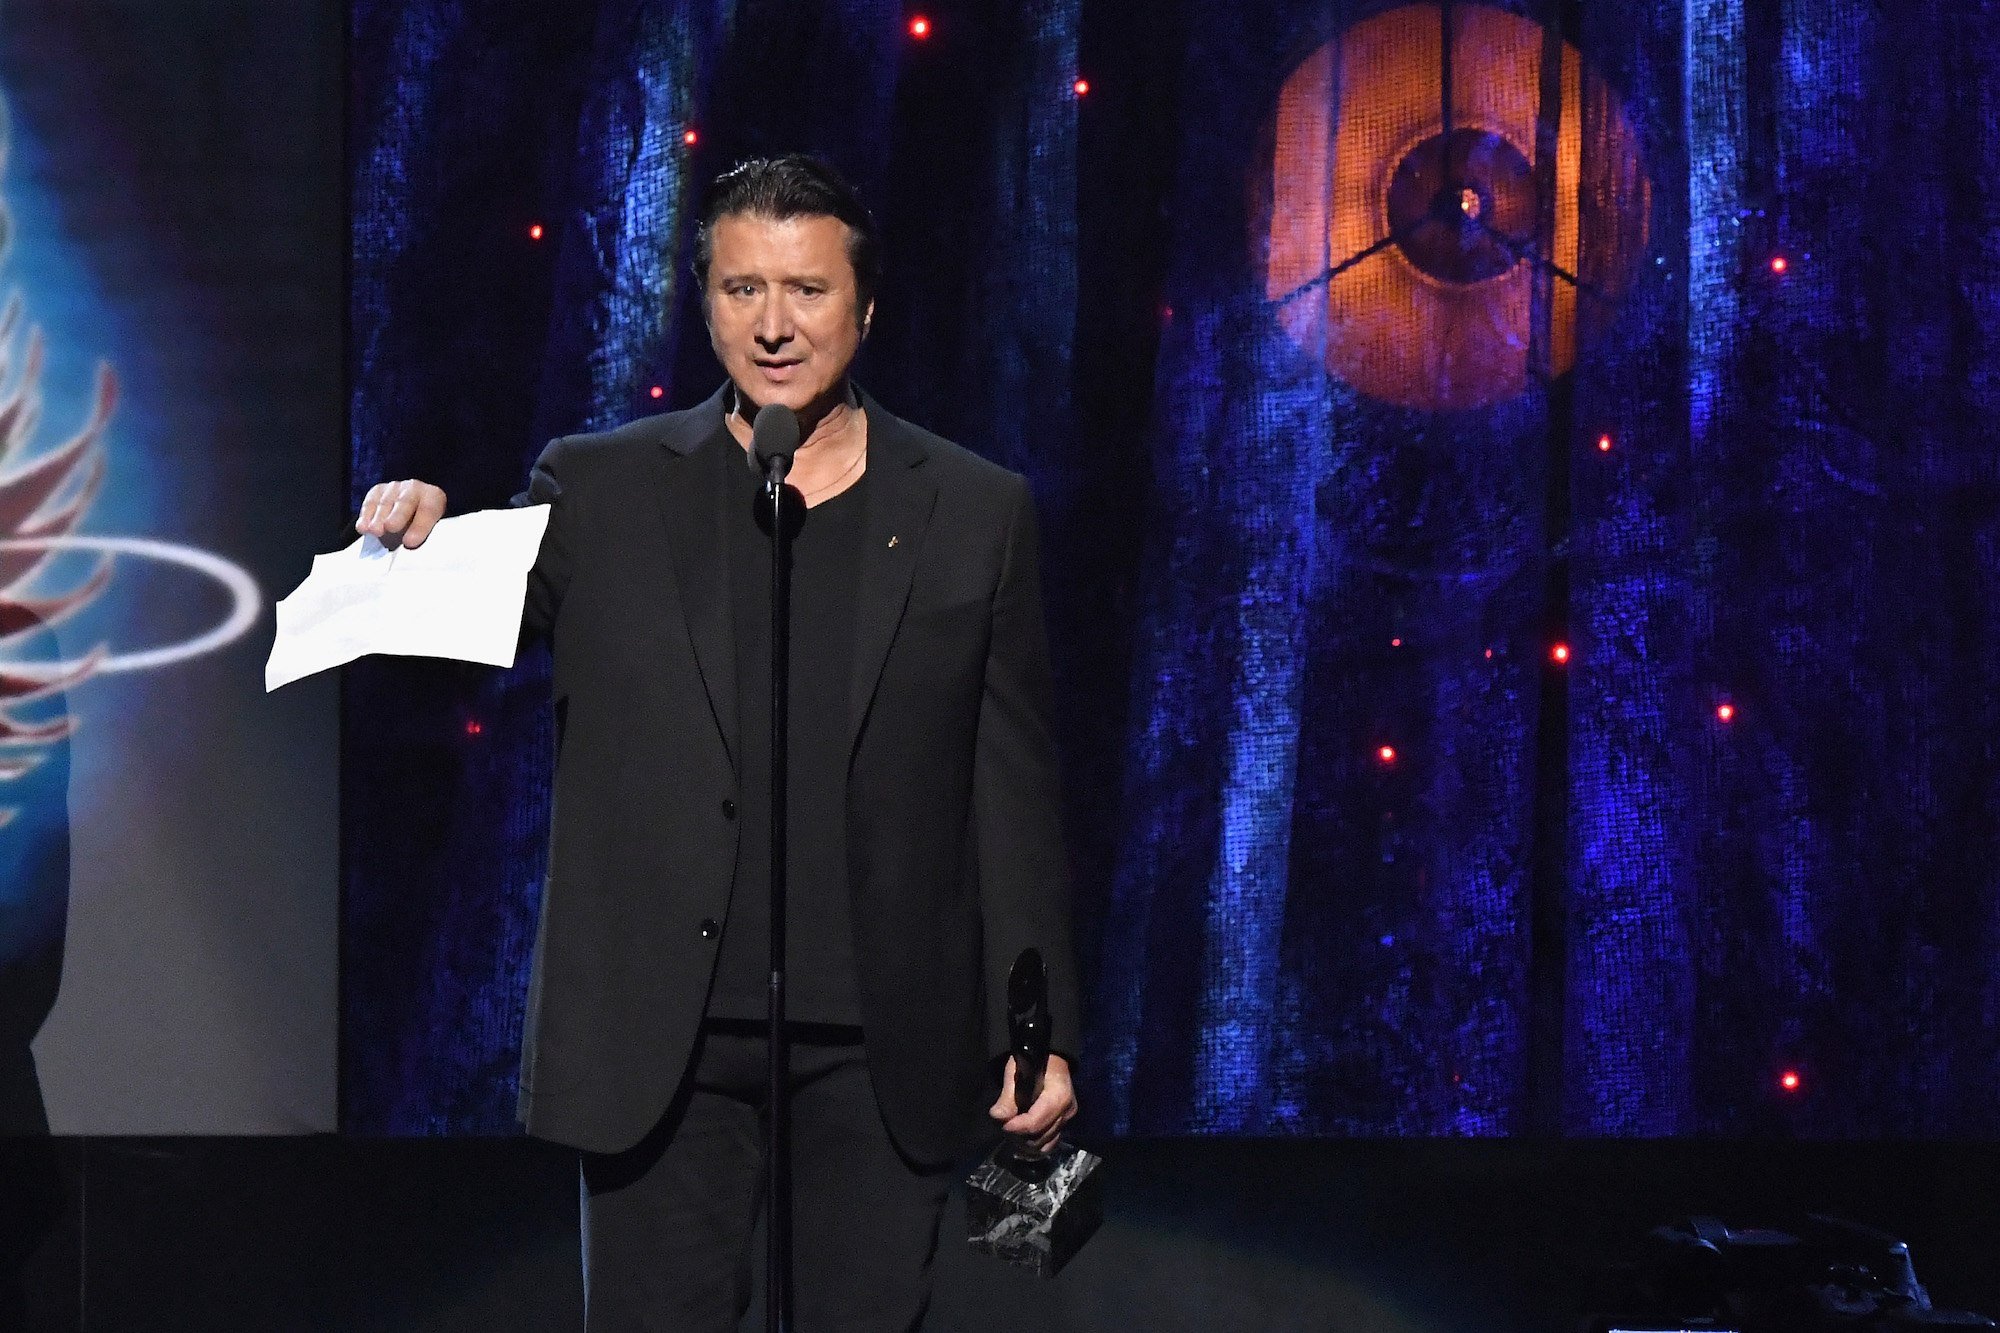 Steve Perry of Journey speaks onstage at the 32nd Annual Rock & Roll Hall Of Fame Induction Ceremony